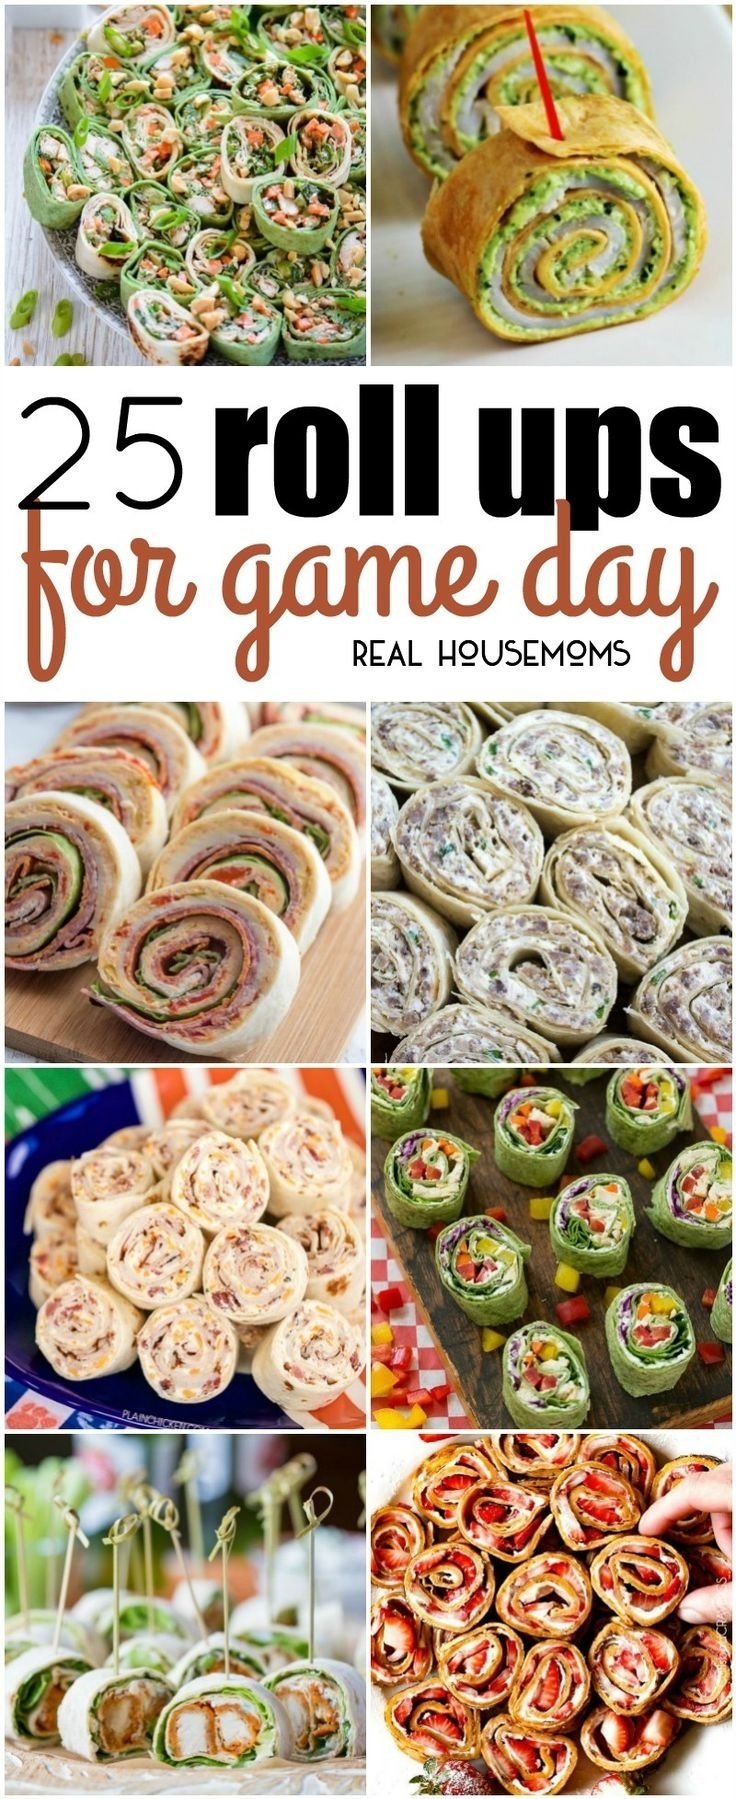 10 Fantastic Football Game Day Food Ideas 78 best game day ideas images on pinterest brie snacks and super 2022